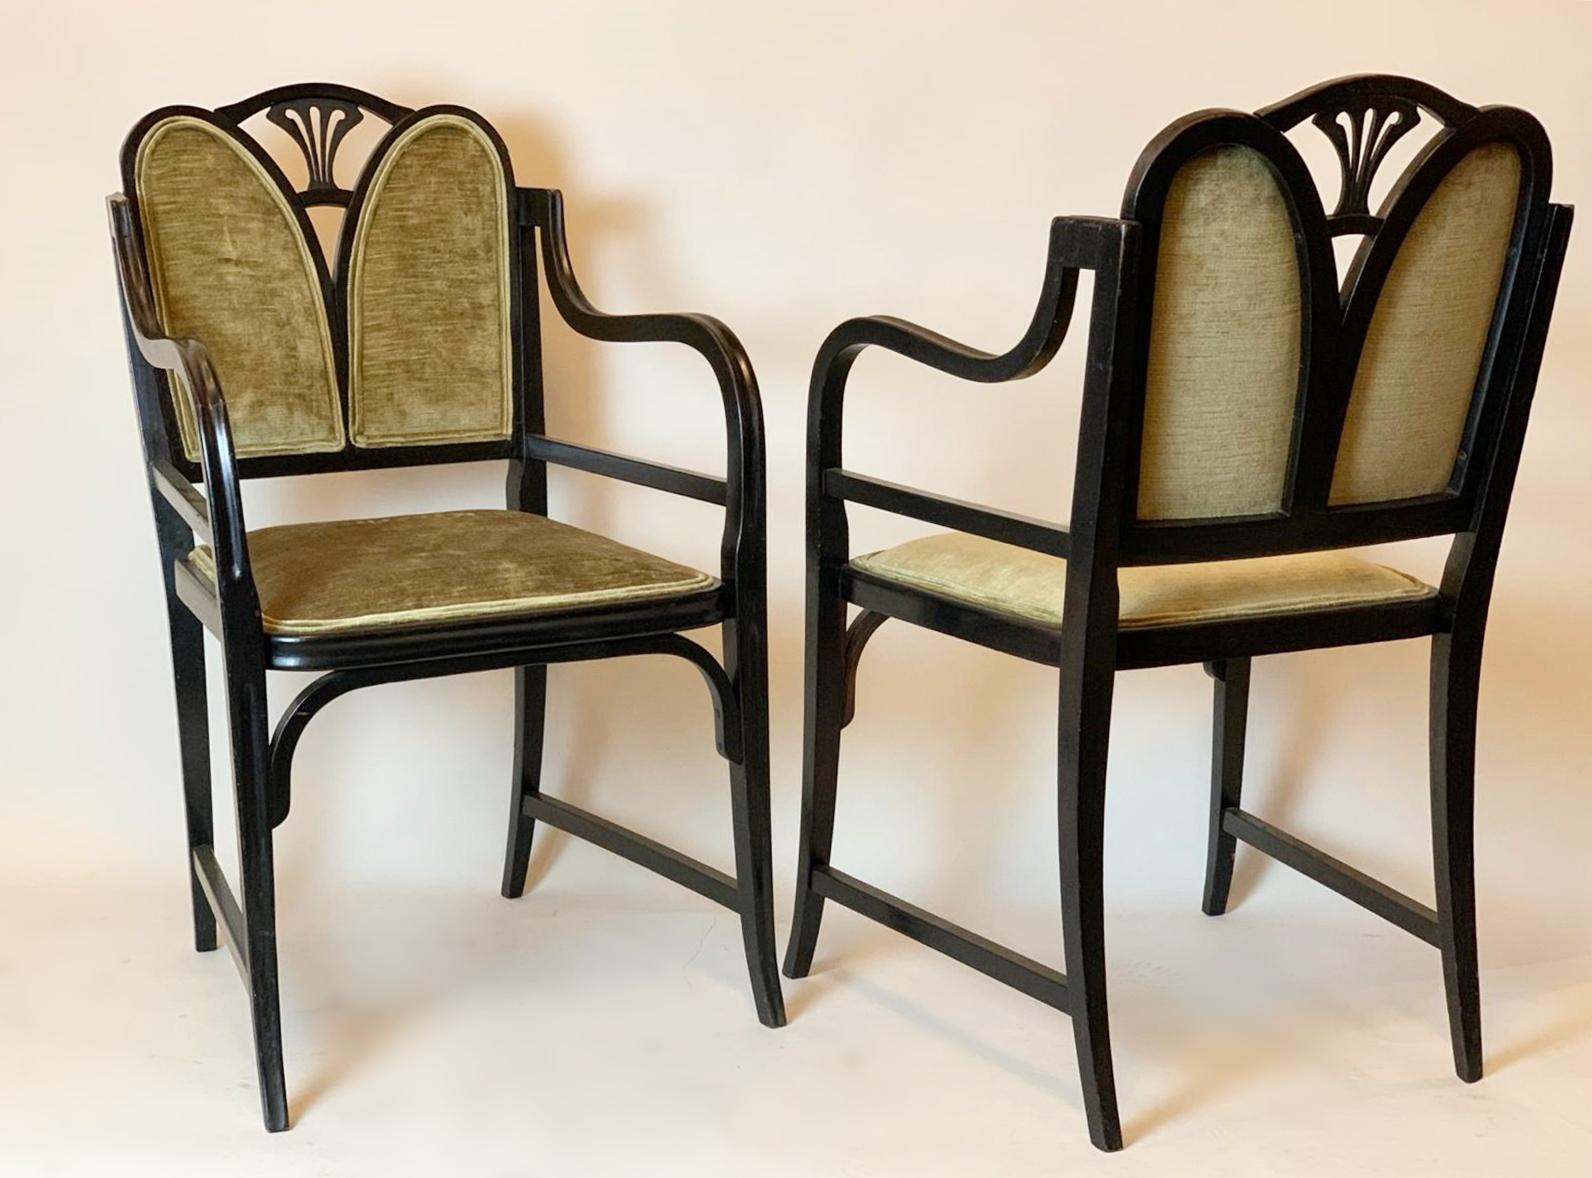 Early 20th Century Pair Of Art Nouveau Thonet Armchairs - Black Lacquered Bentwood and Velvet